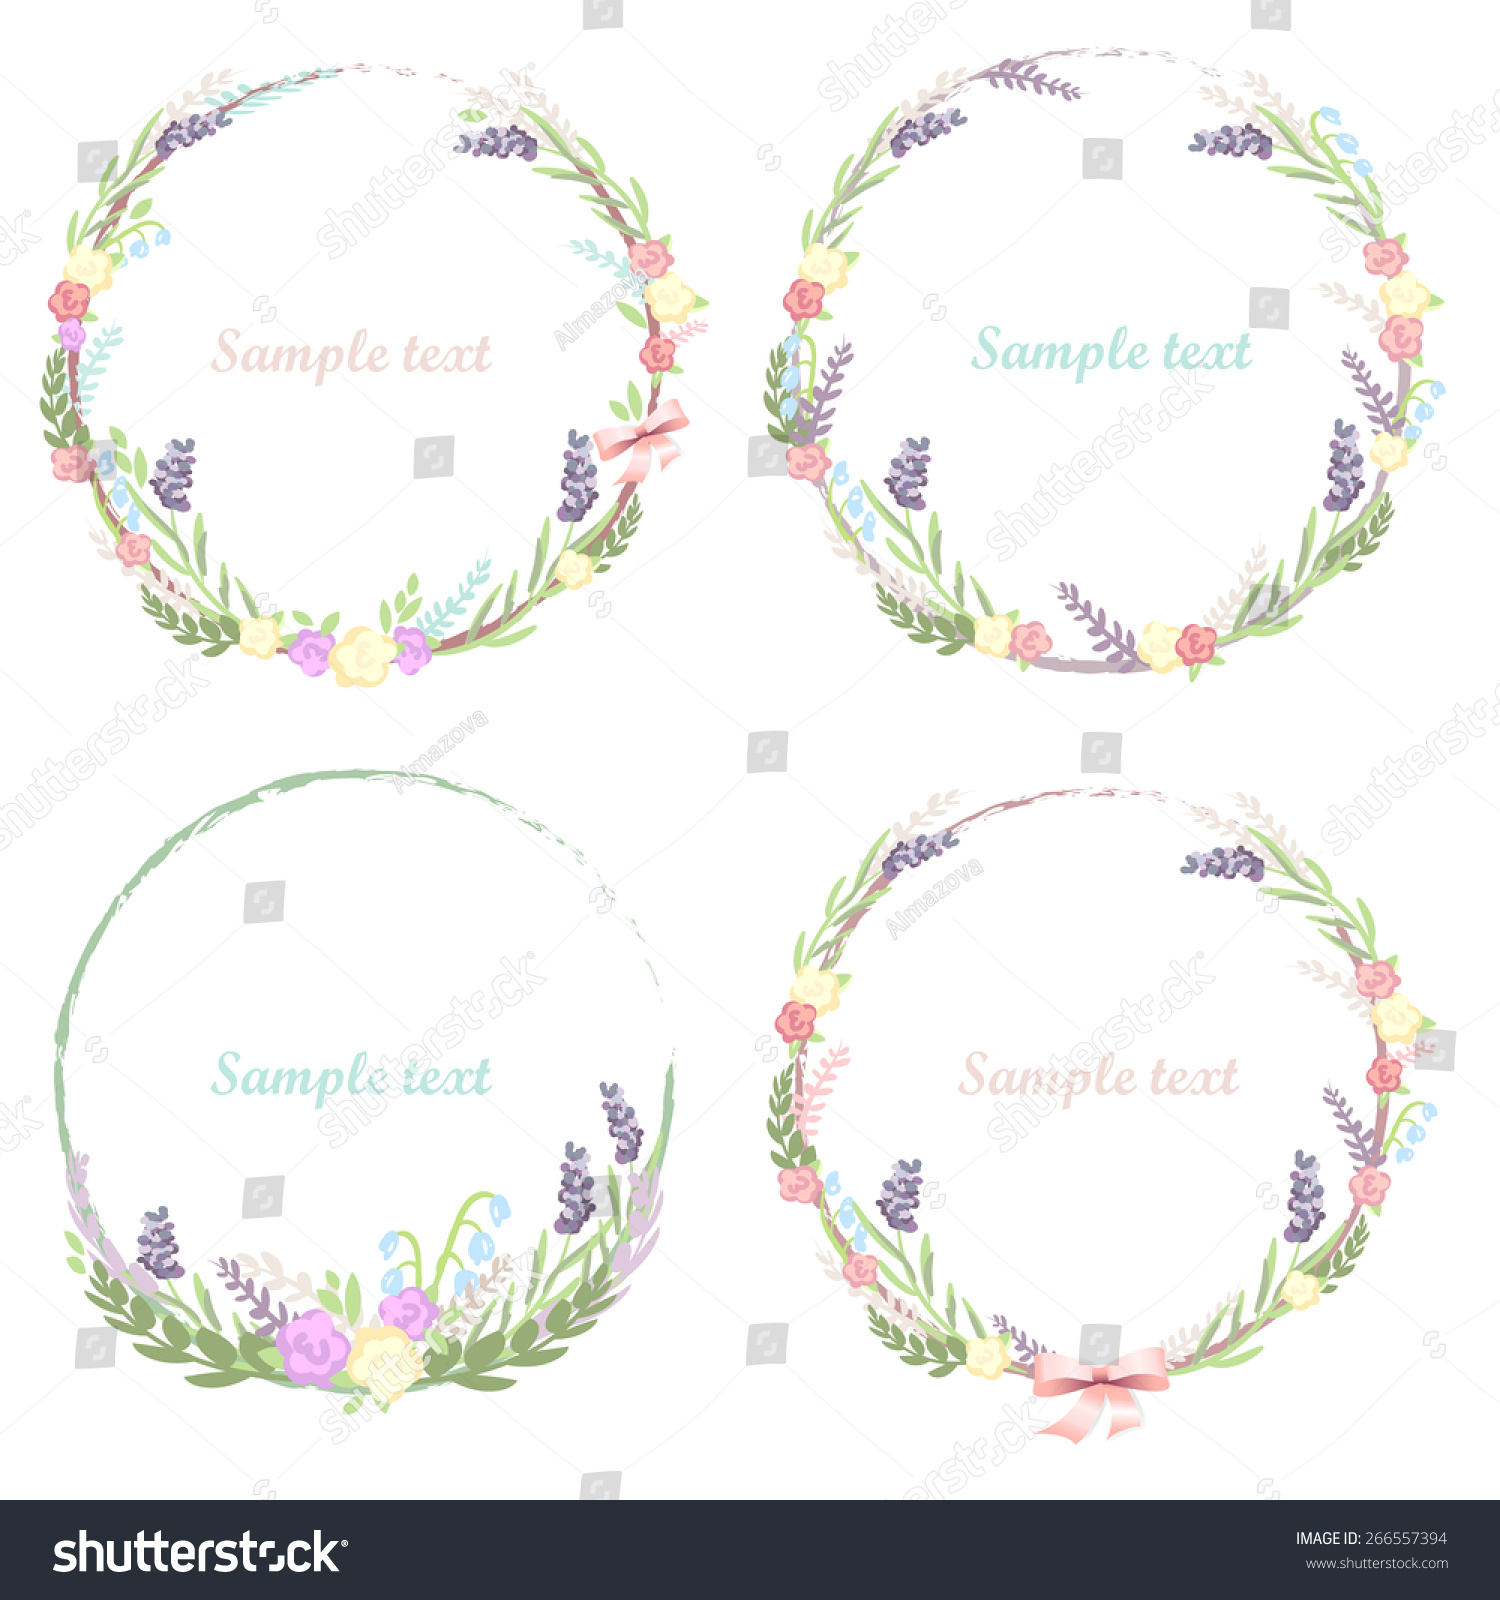 Floral Frame Vector Stock Vector (Royalty Free) 266557394 - Shutterstock